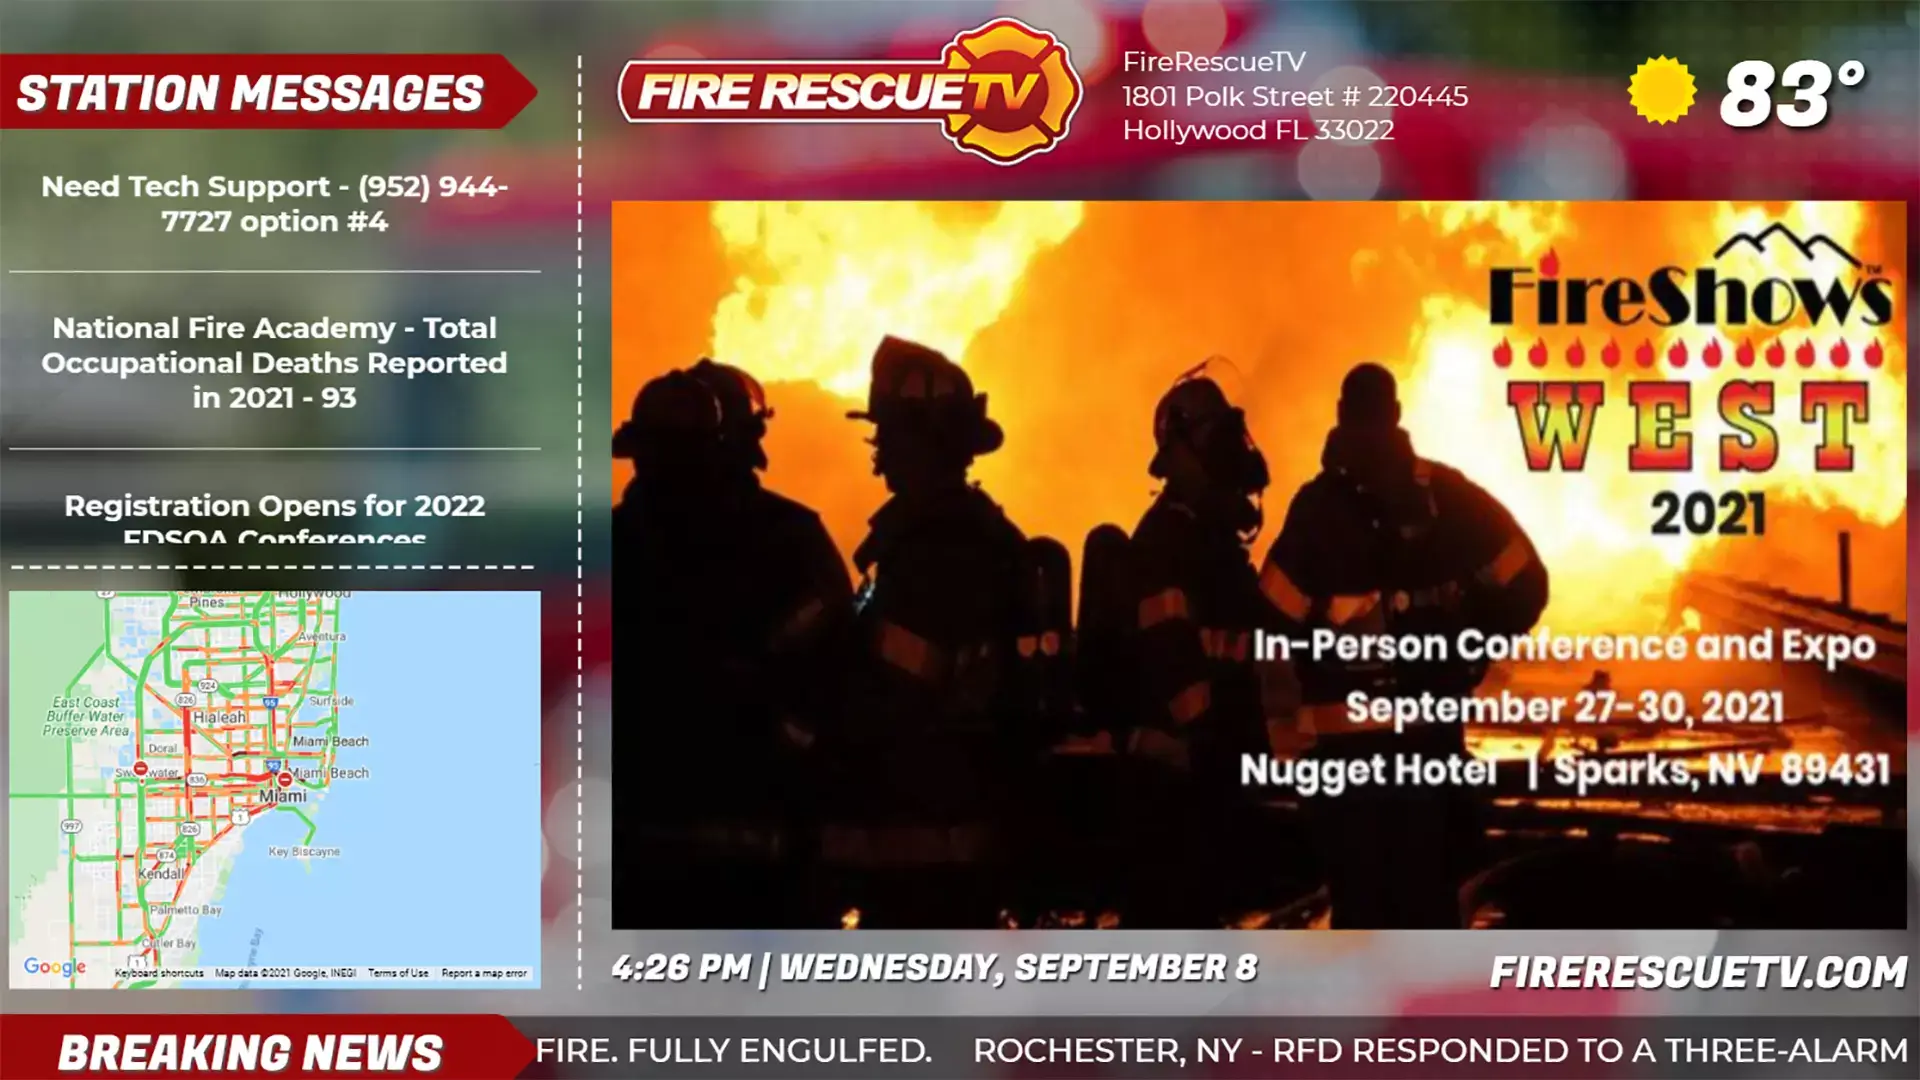 Red digital signage featuring announcements, station messages, and local maps for Fire Rescue TV Network